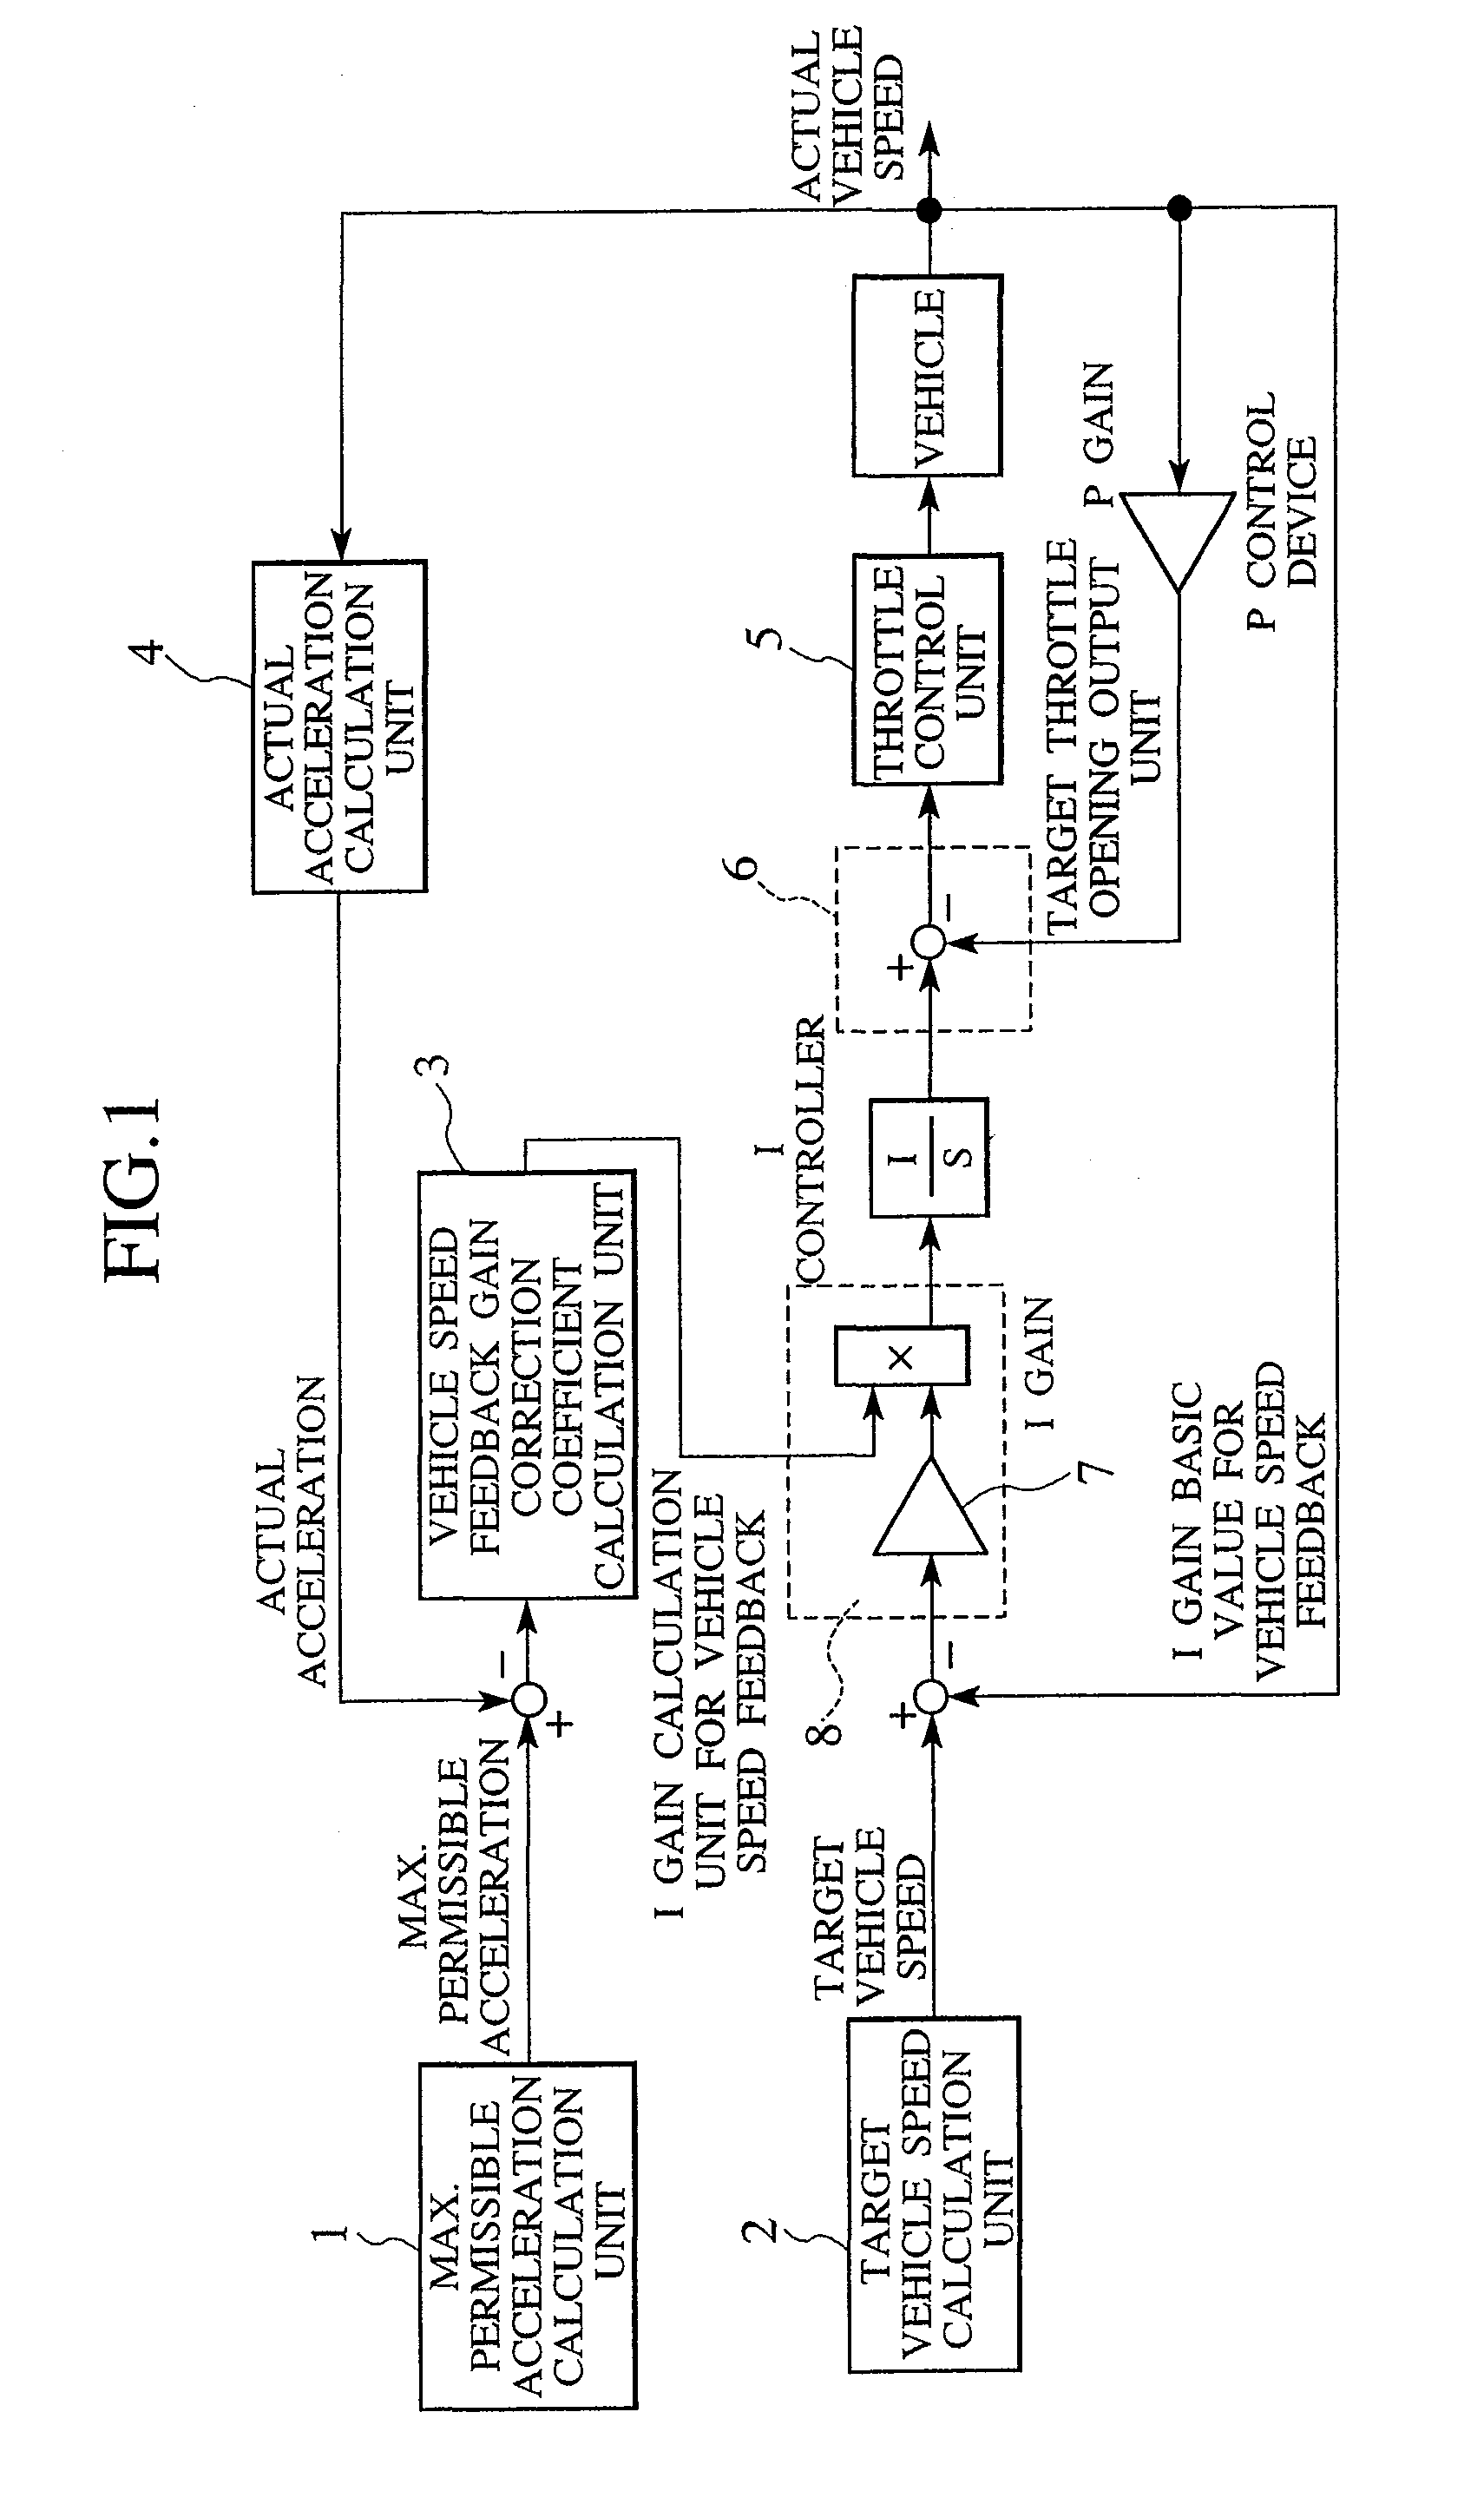 Vehicle cruise control device and method